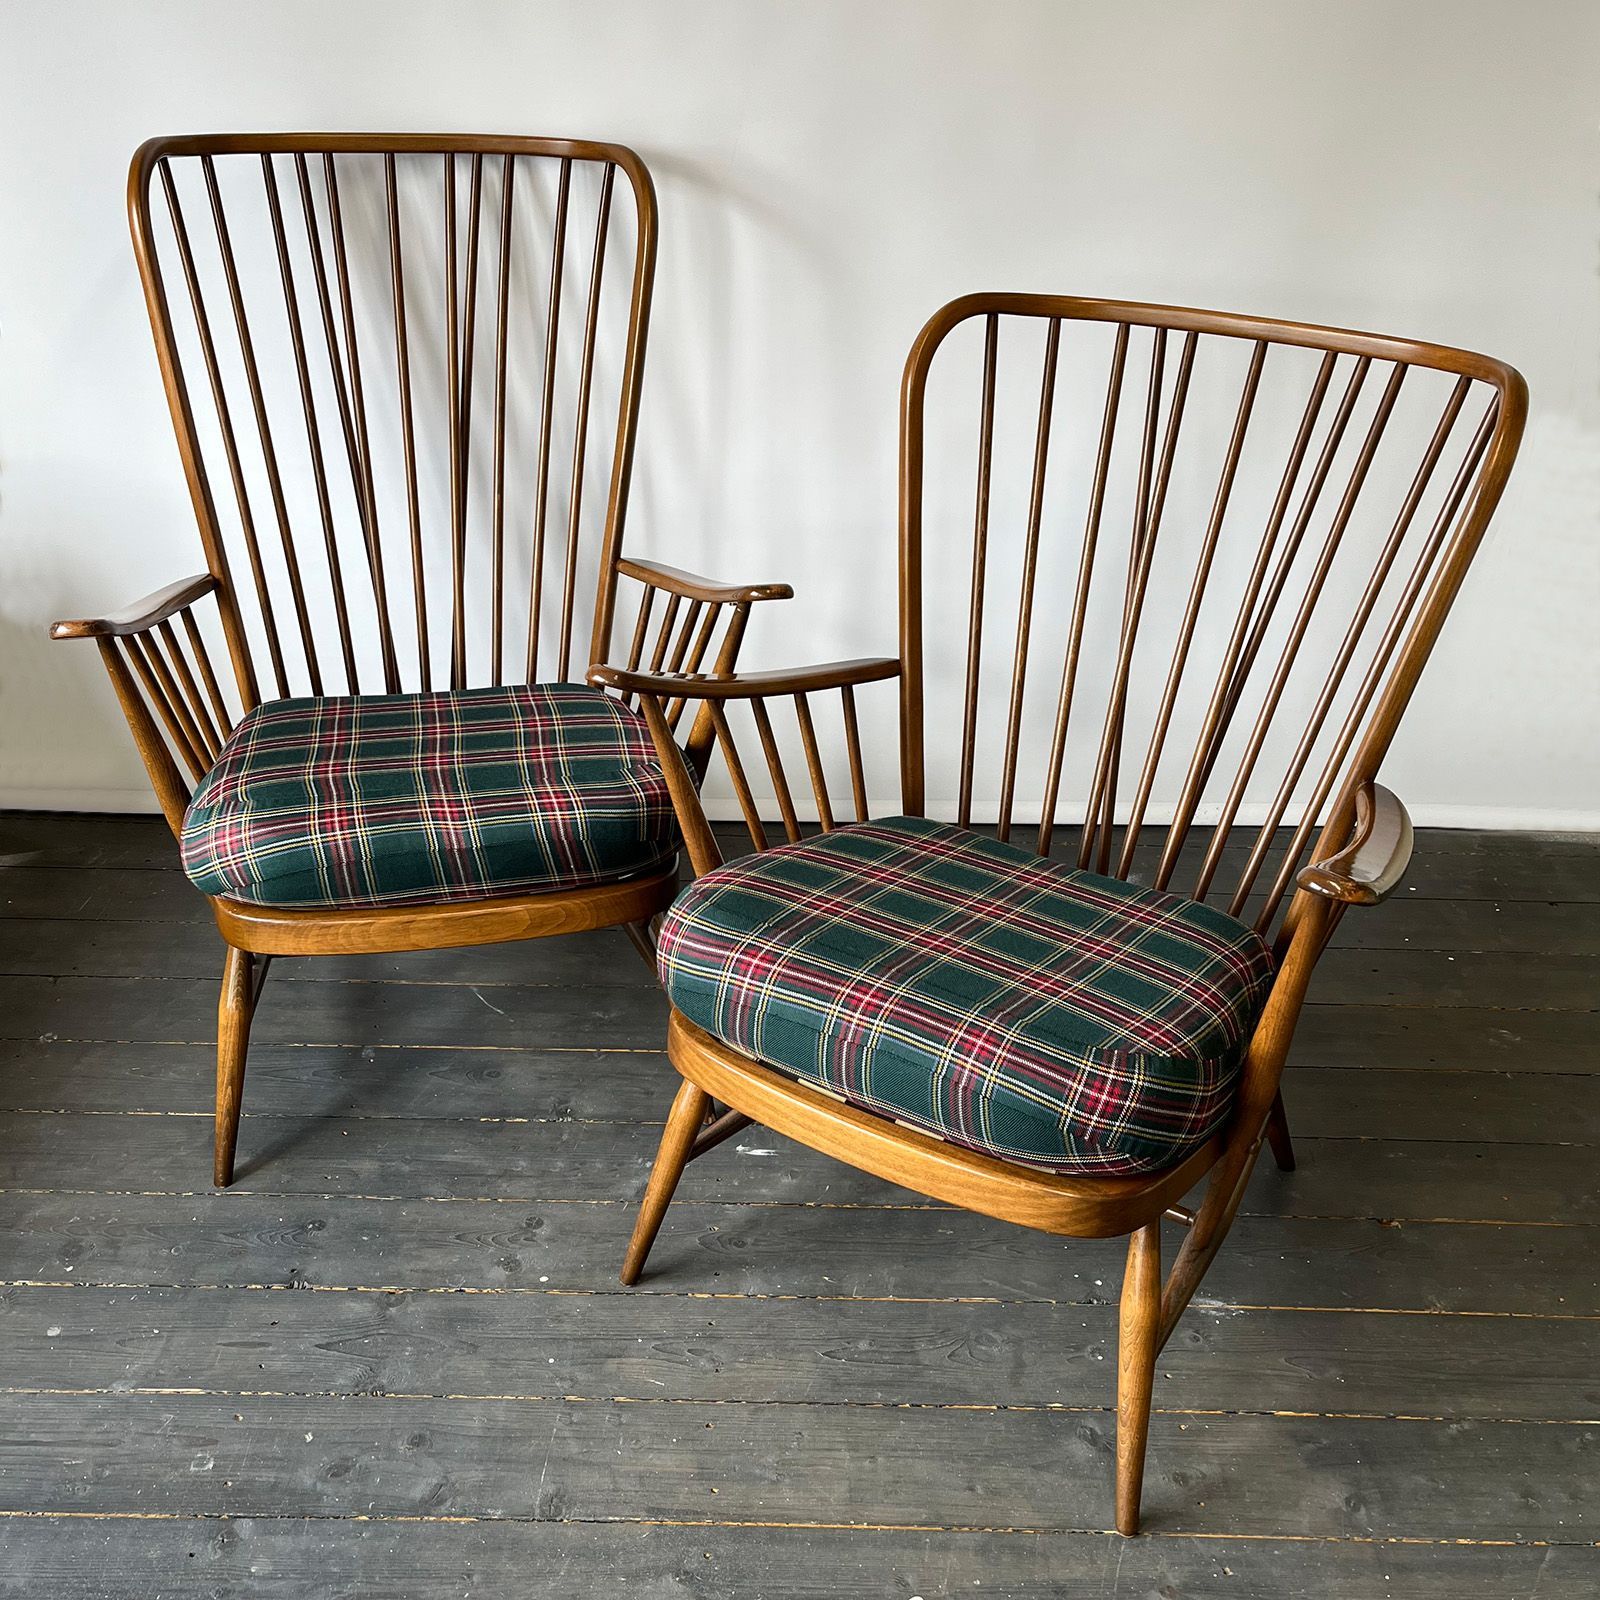 Ercol Spindle Chair with Tartan pads